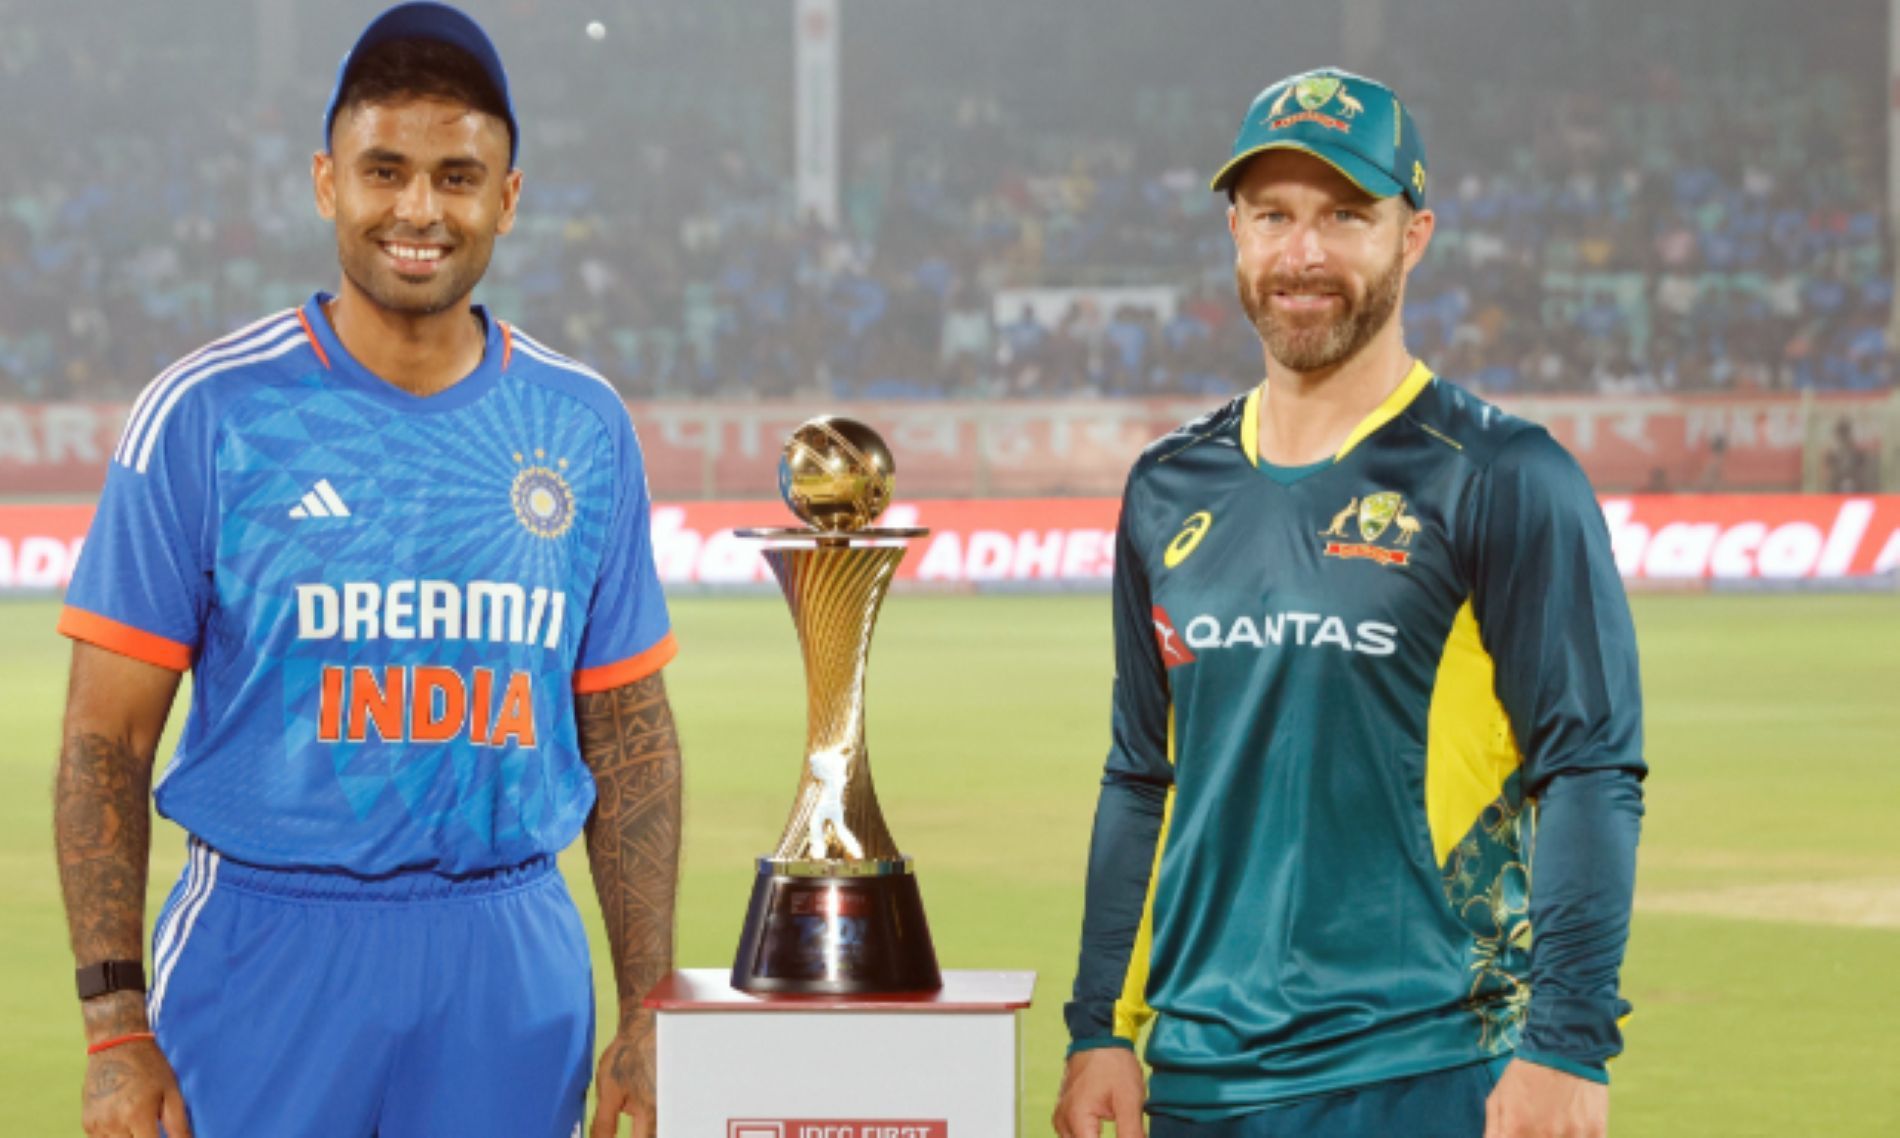 The T20I series began just four days after the World Cup final.